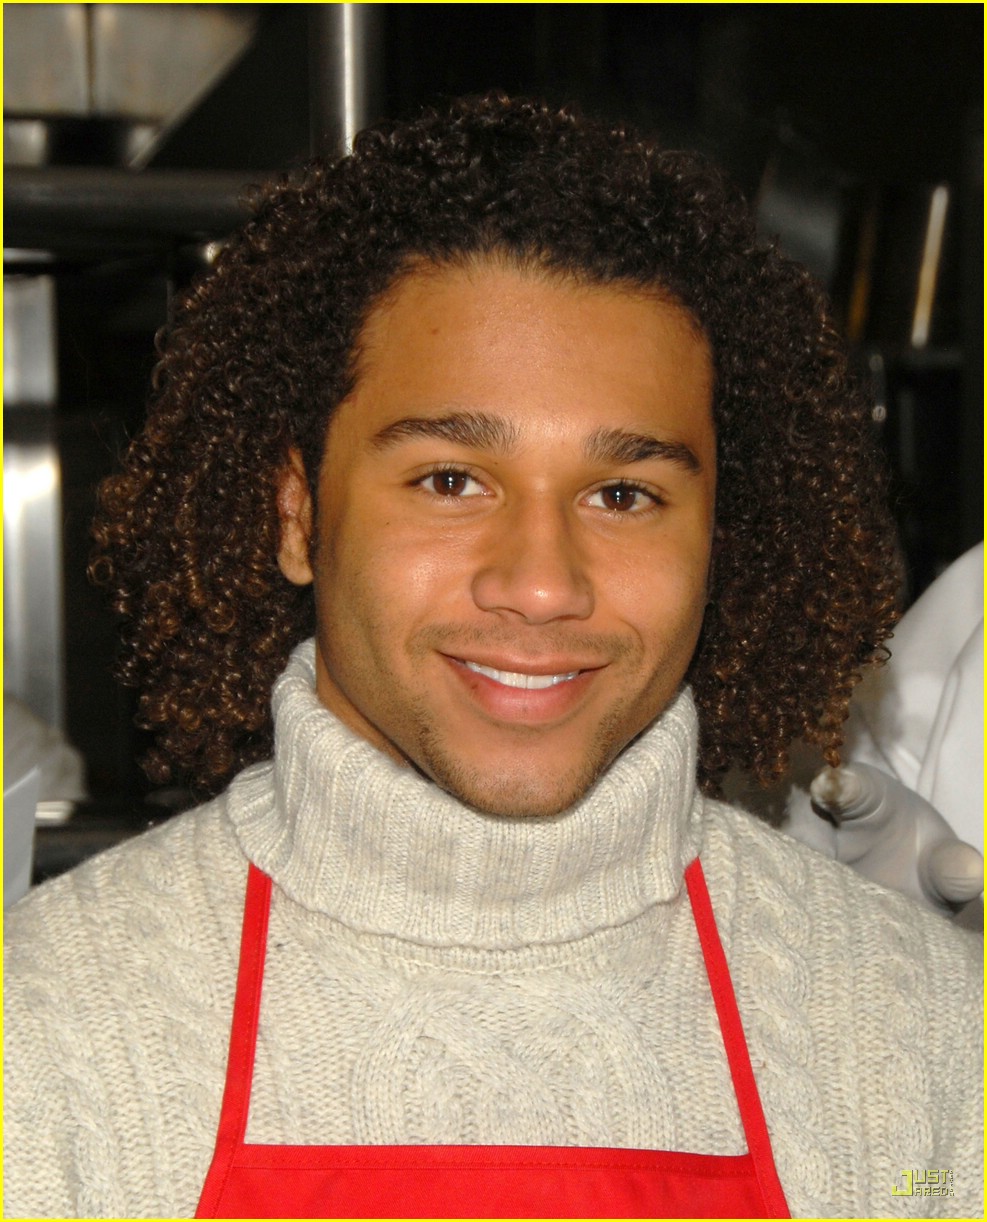 All 105+ Images how much did corbin bleu pay for his christmas tree Full HD, 2k, 4k